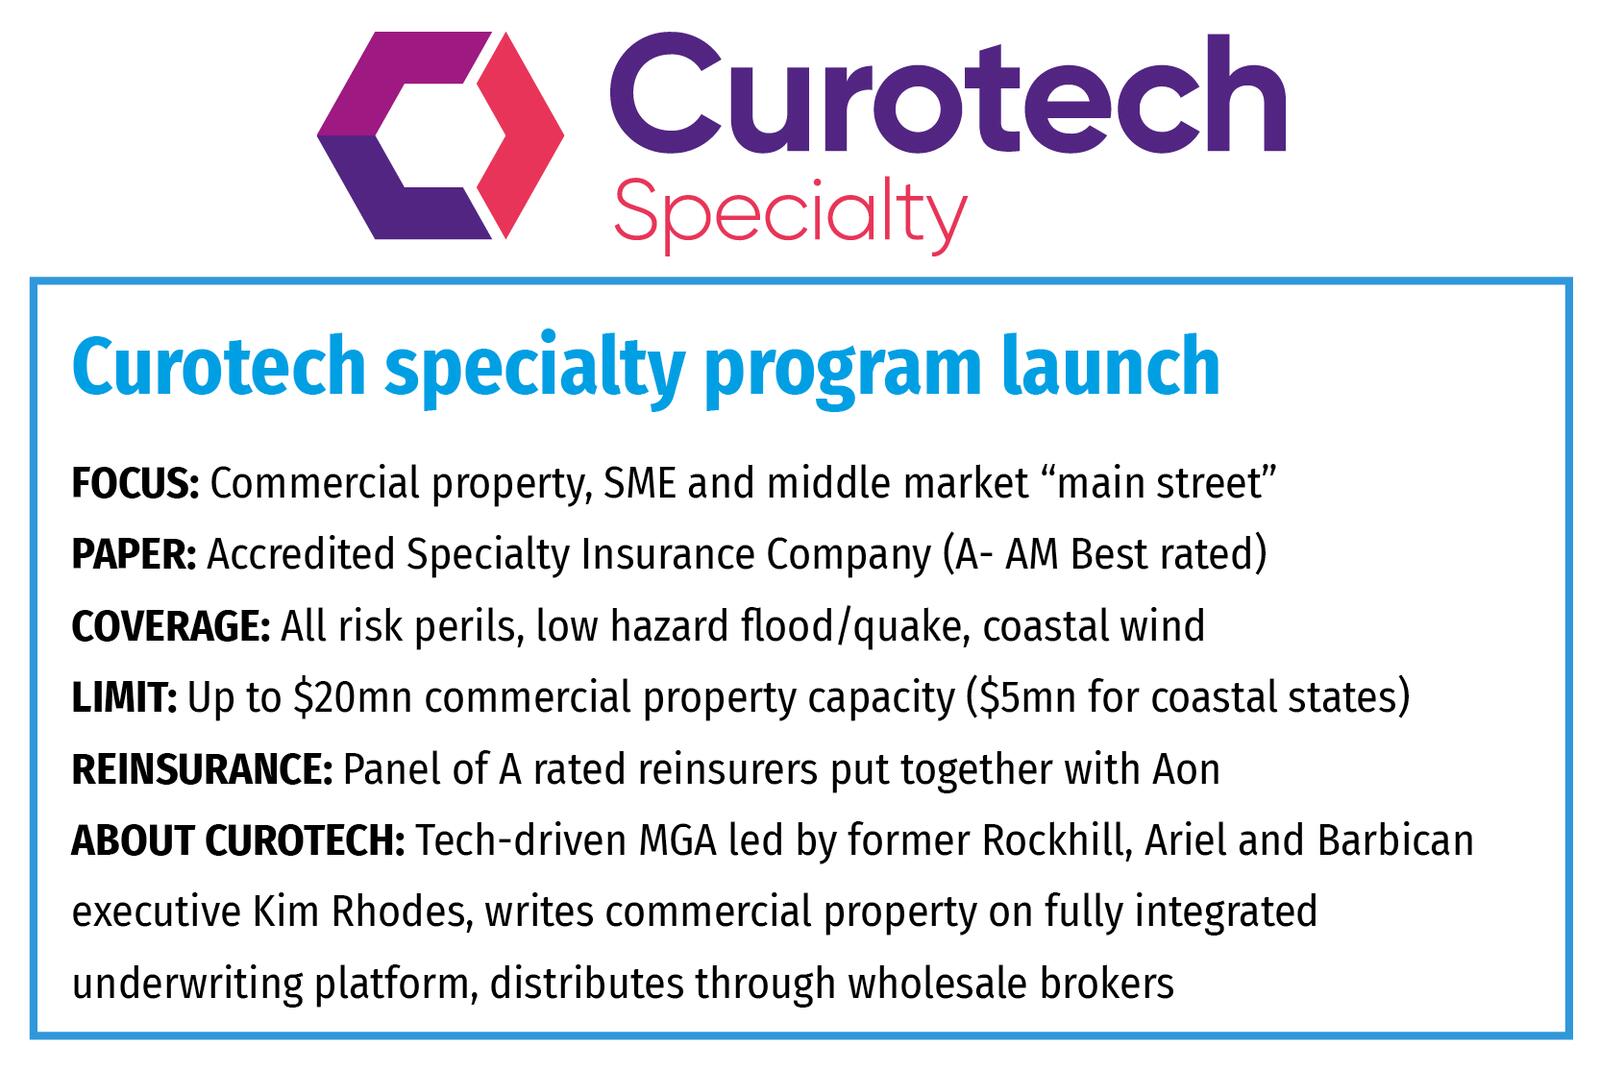 Curotech specialty program launch 